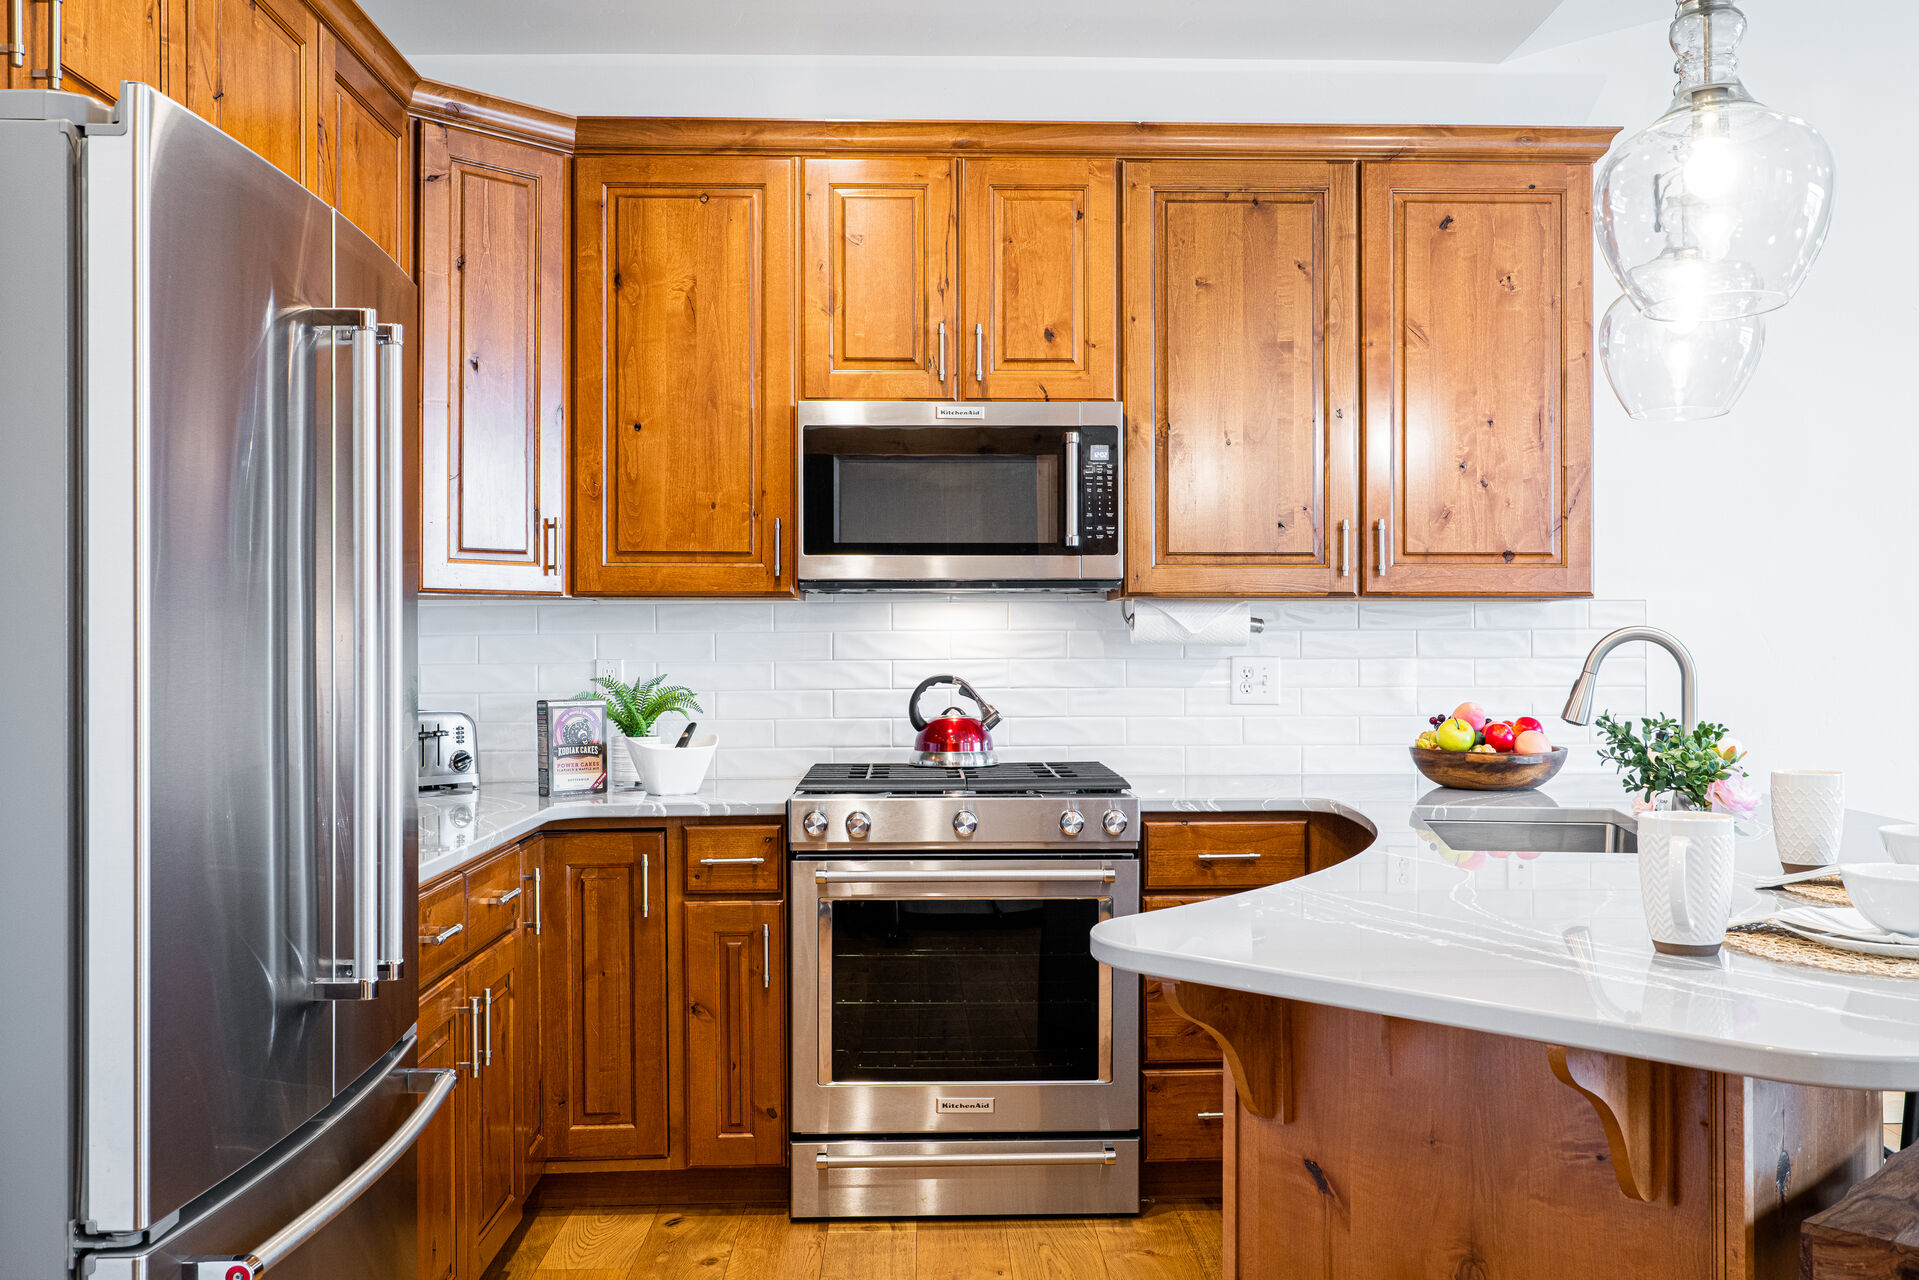 Stone Counters and Stainless Steel Appliances Including Gas Range